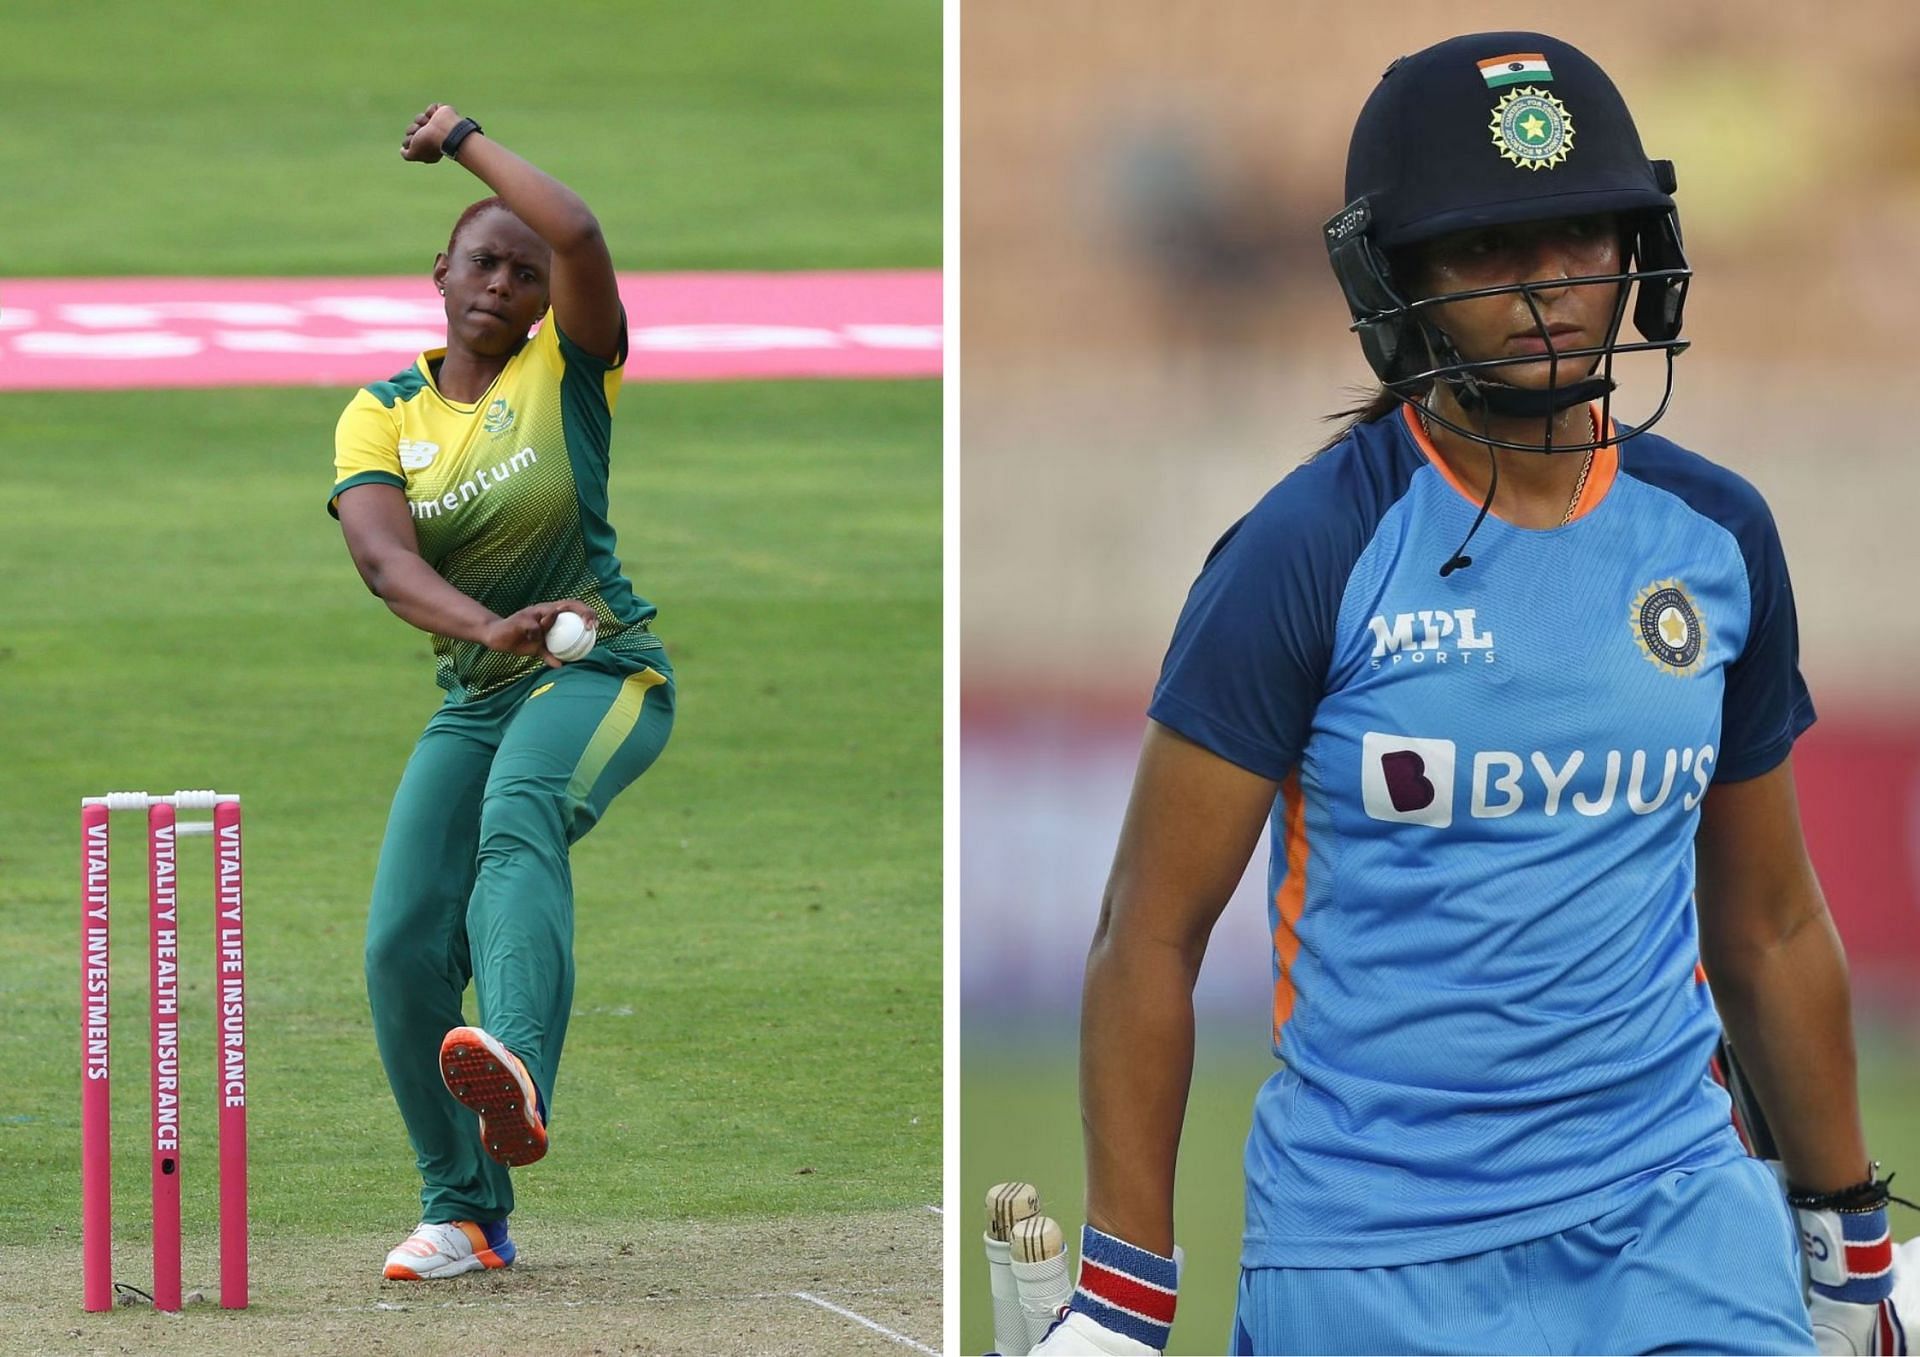 South Africa and India have already qualified for the final of the tri-series!